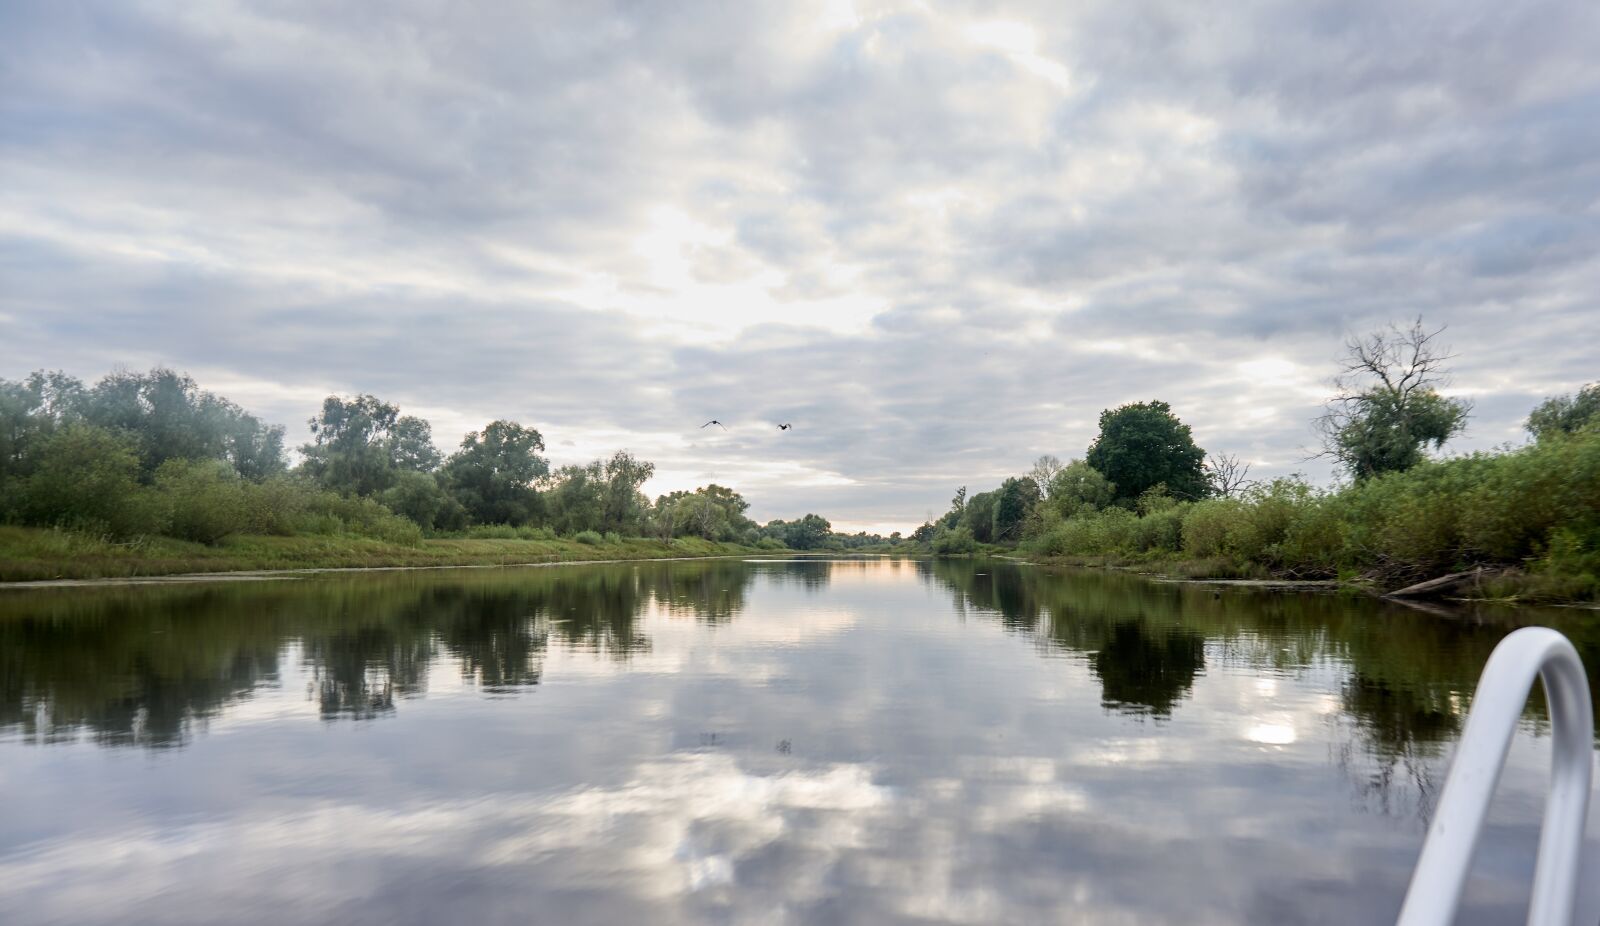 Sony a6000 + Sony E PZ 16-50 mm F3.5-5.6 OSS (SELP1650) sample photo. Belarus, river, nature photography